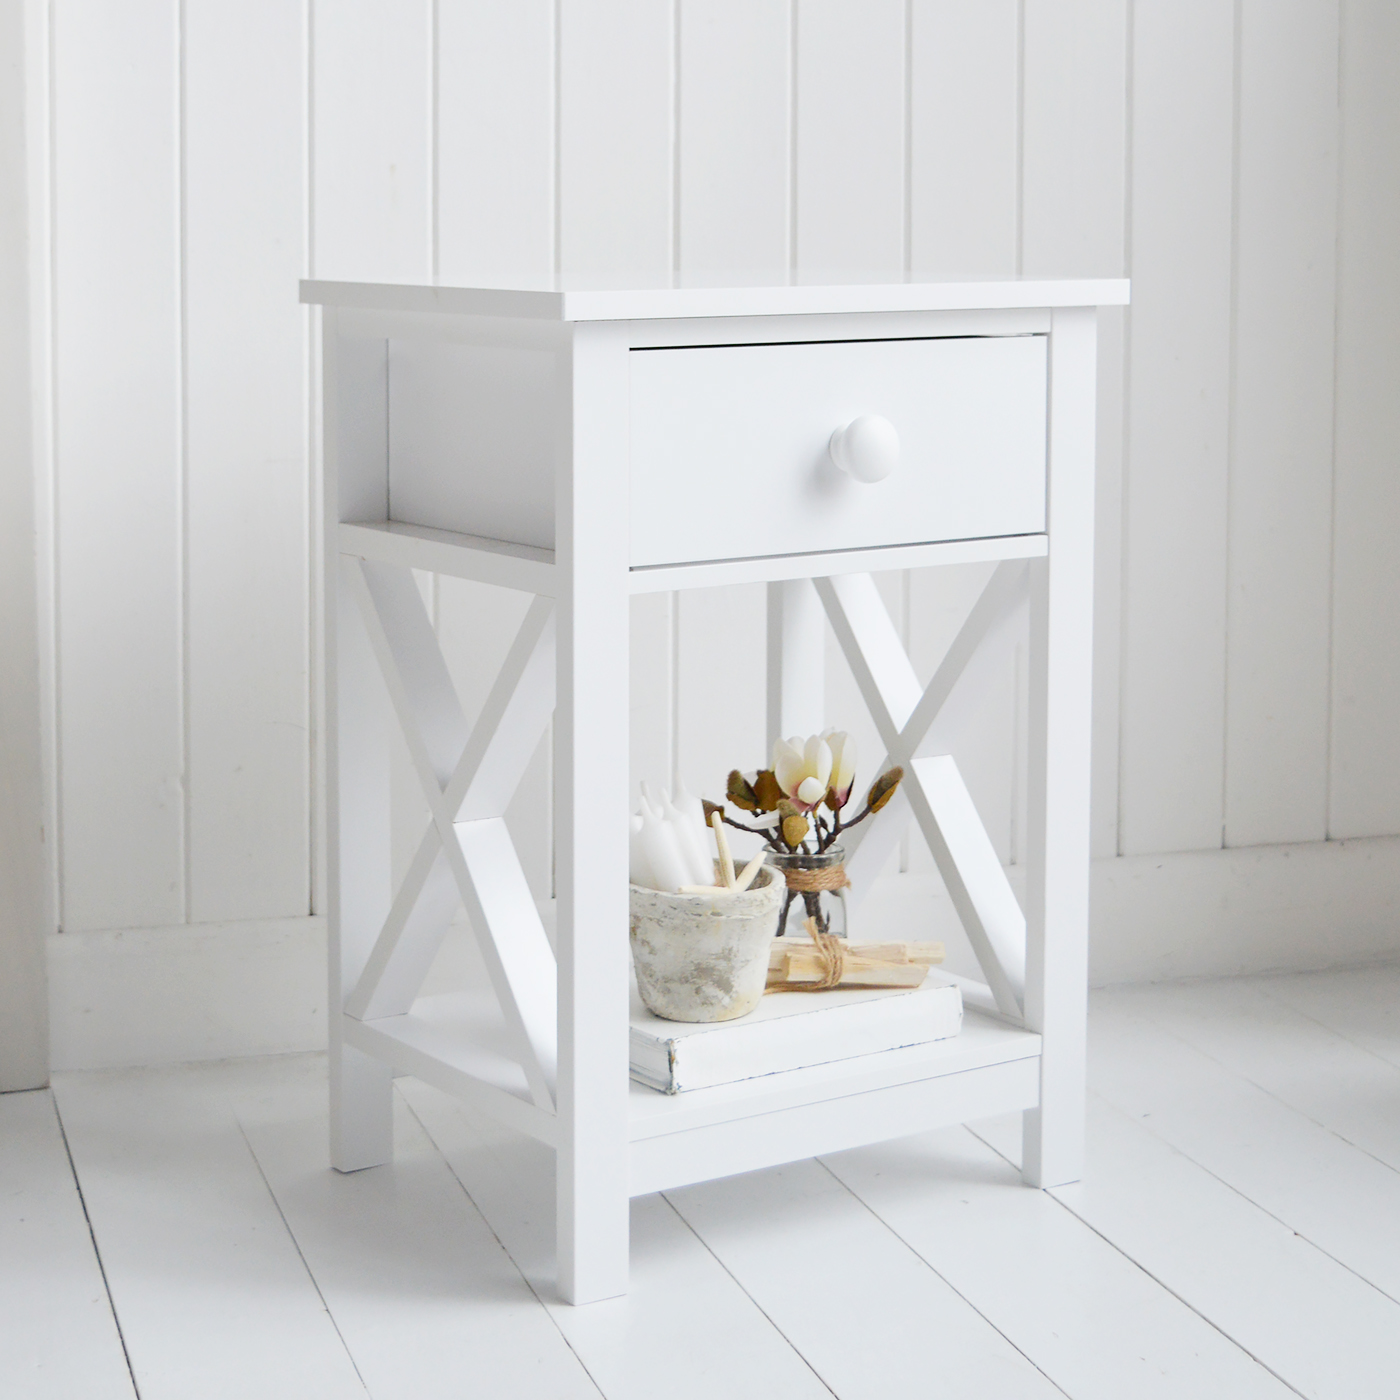 Bar Harbor white bedside table - New England Coastal and Modern Country Furniture. Lamp table with drawer and shelf - living room furniture